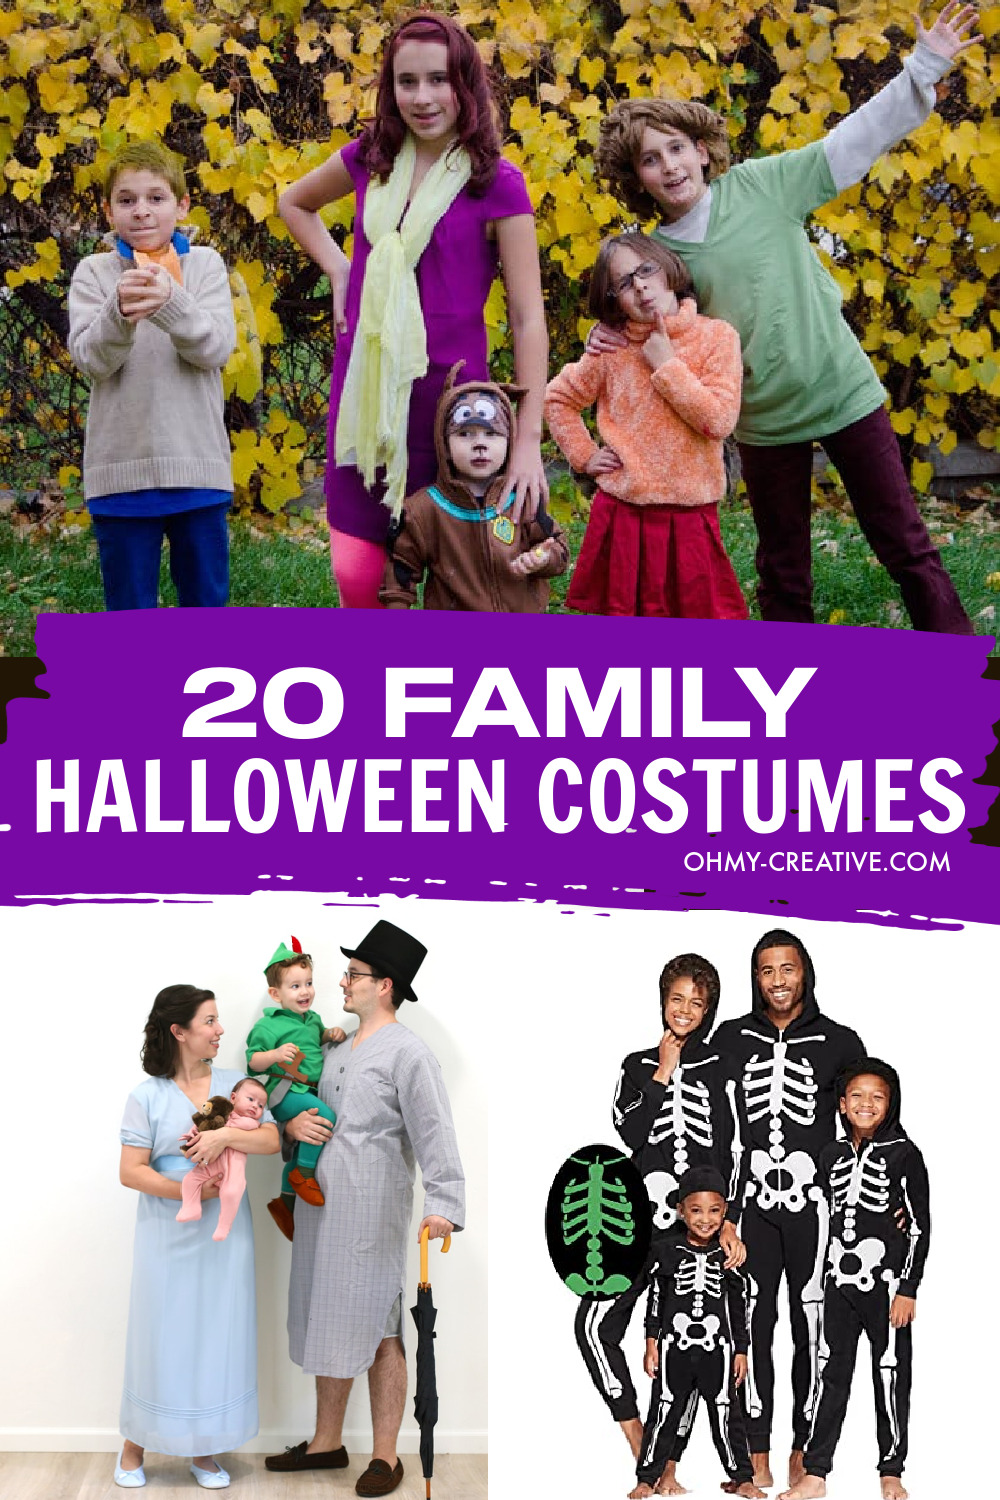 FAMILY Halloween Costumes including Scooby Doo, Peter Pan and glow in the dark skeleton onesies and more!